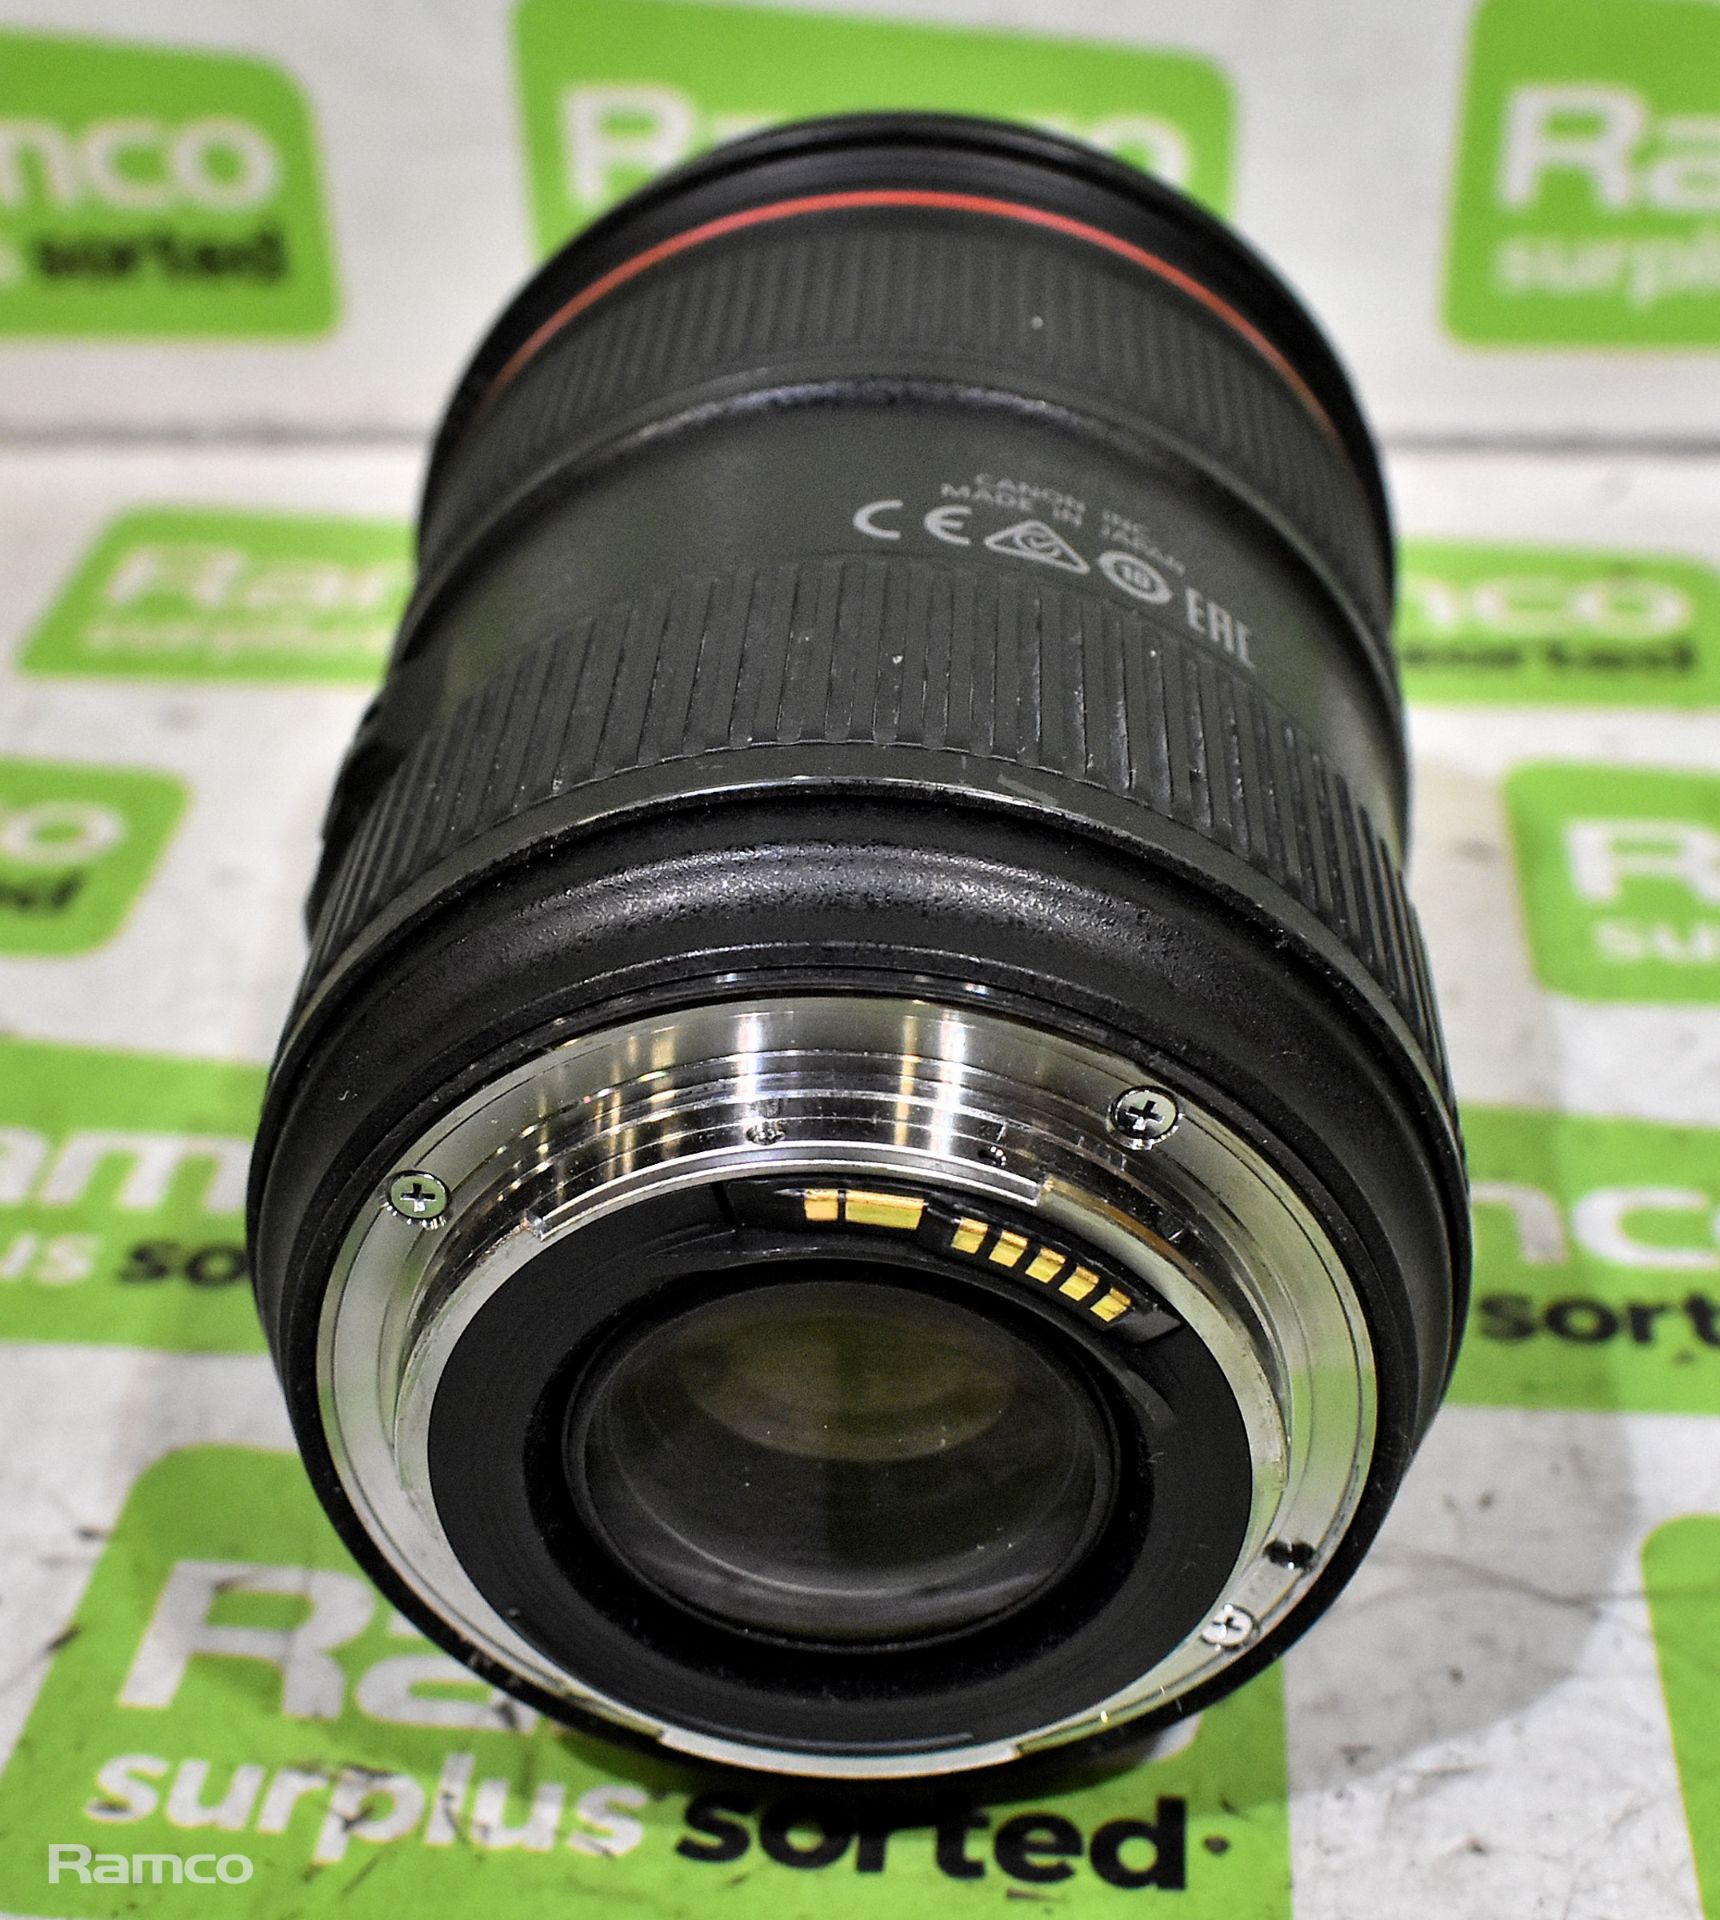 Canon Zoom lens EF 24-70mm F/2.8 L ii USM lens with Canon EW-88C hood - Image 7 of 7